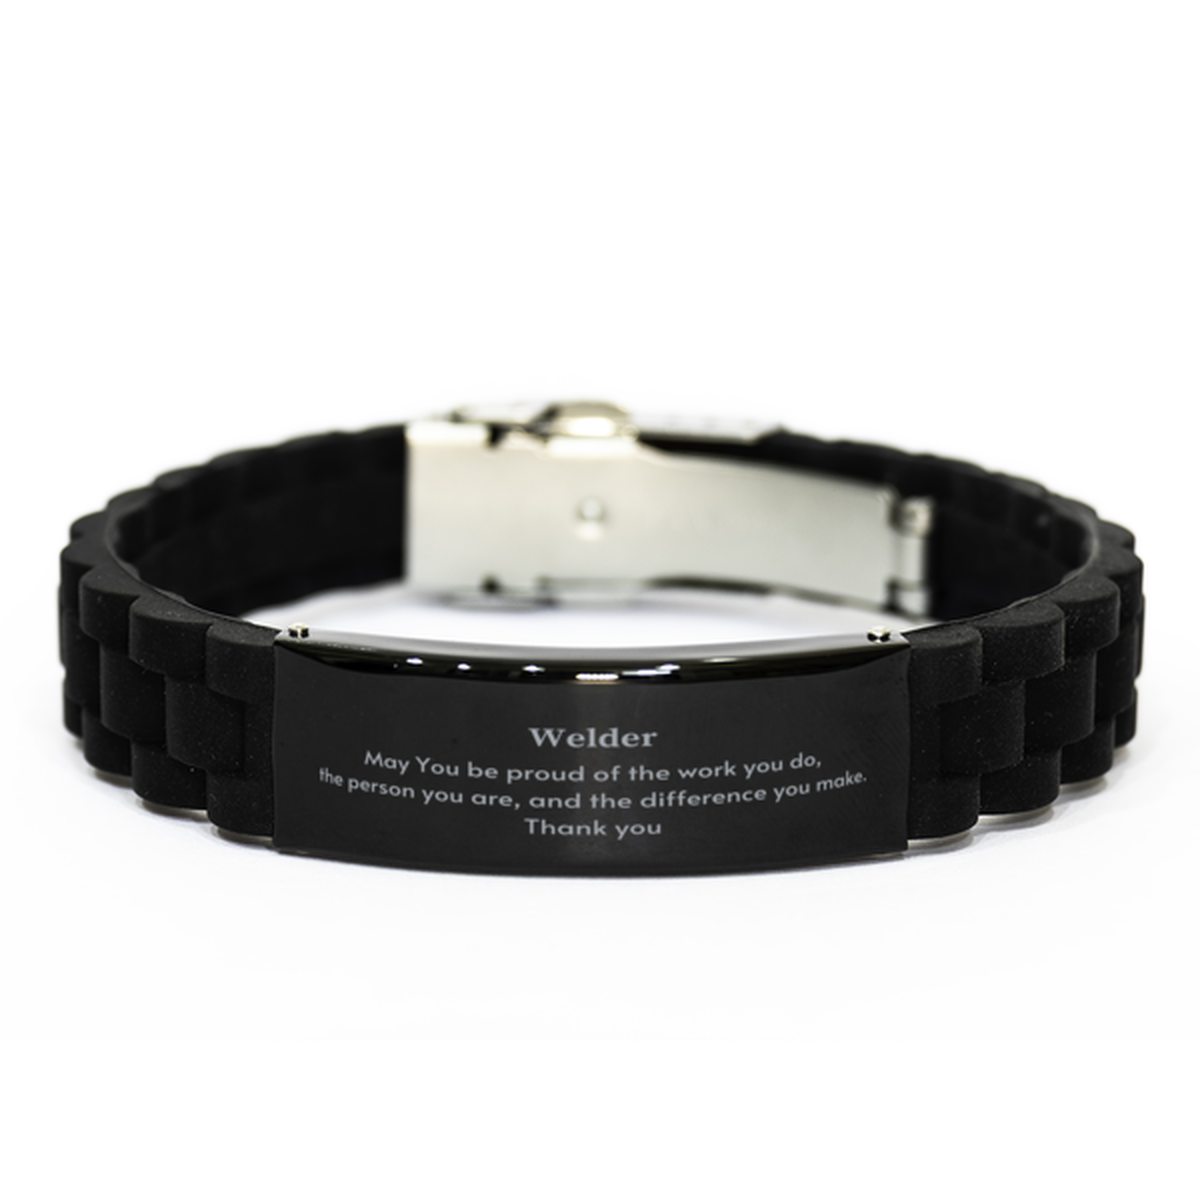 Heartwarming Black Glidelock Clasp Bracelet Retirement Coworkers Gifts for Welder, Welder May You be proud of the work you do, the person you are Gifts for Boss Men Women Friends